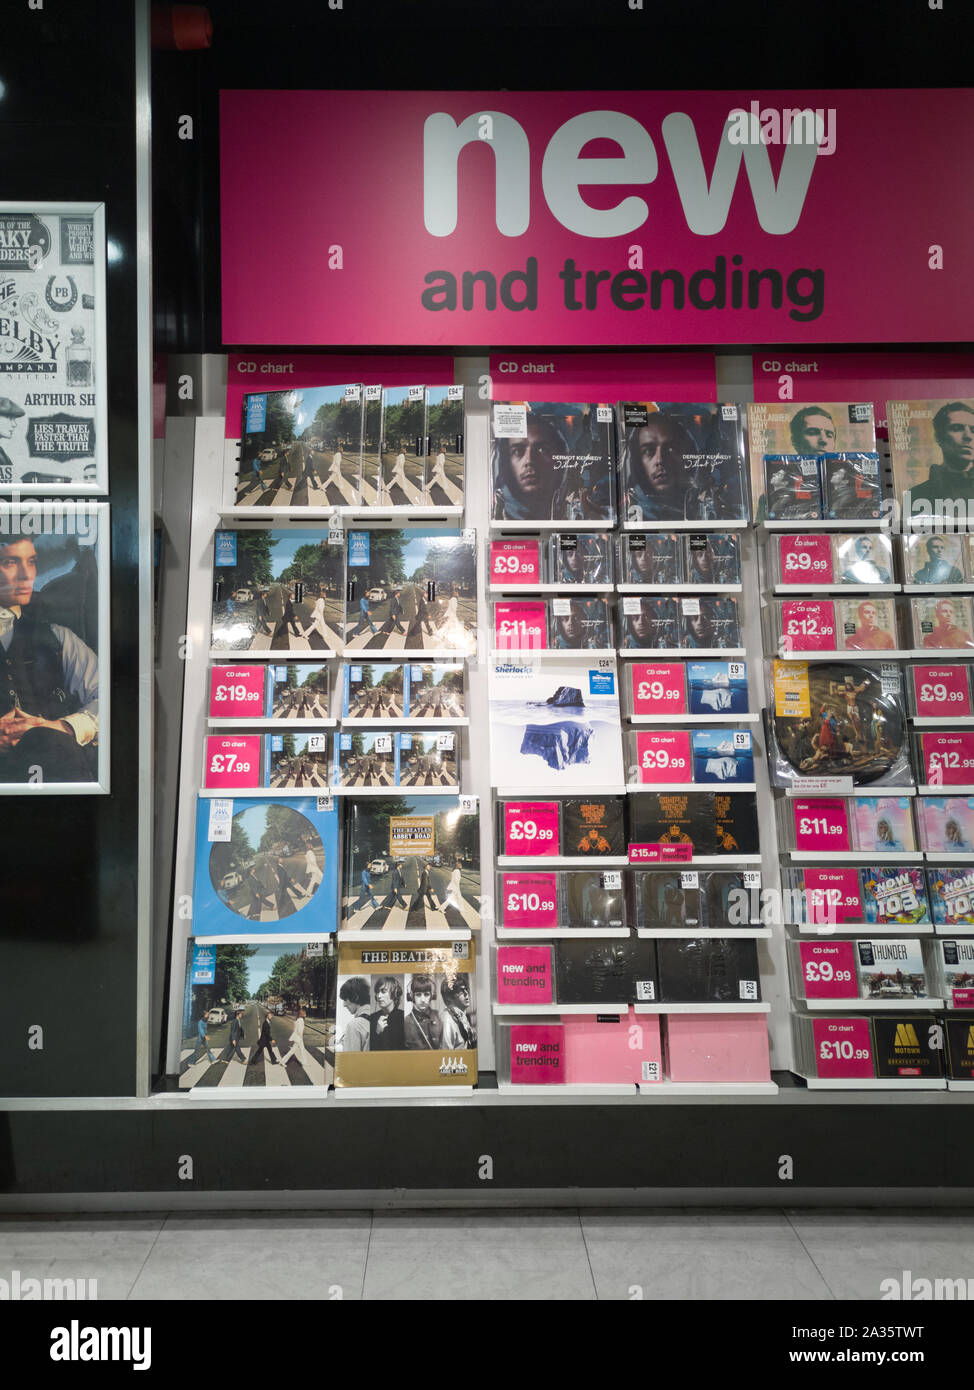 5th October 2019. The re-release of The Beatles album Abbey Road on it's 50th anniversary saw it go to number one, the top of the UK music charts. Here, a variety special editions including vinyl records and CD's can be seen in Birmingham's HMV store. The album has now set a record - the gap of 49 years and 252 days since its initial chart-topping run ended in early 1970 is the longest gap before returning to number one. Abbey Road is the eleventh studio album by the Beatles, released on 26 September 1969 by Apple Records. Stock Photo